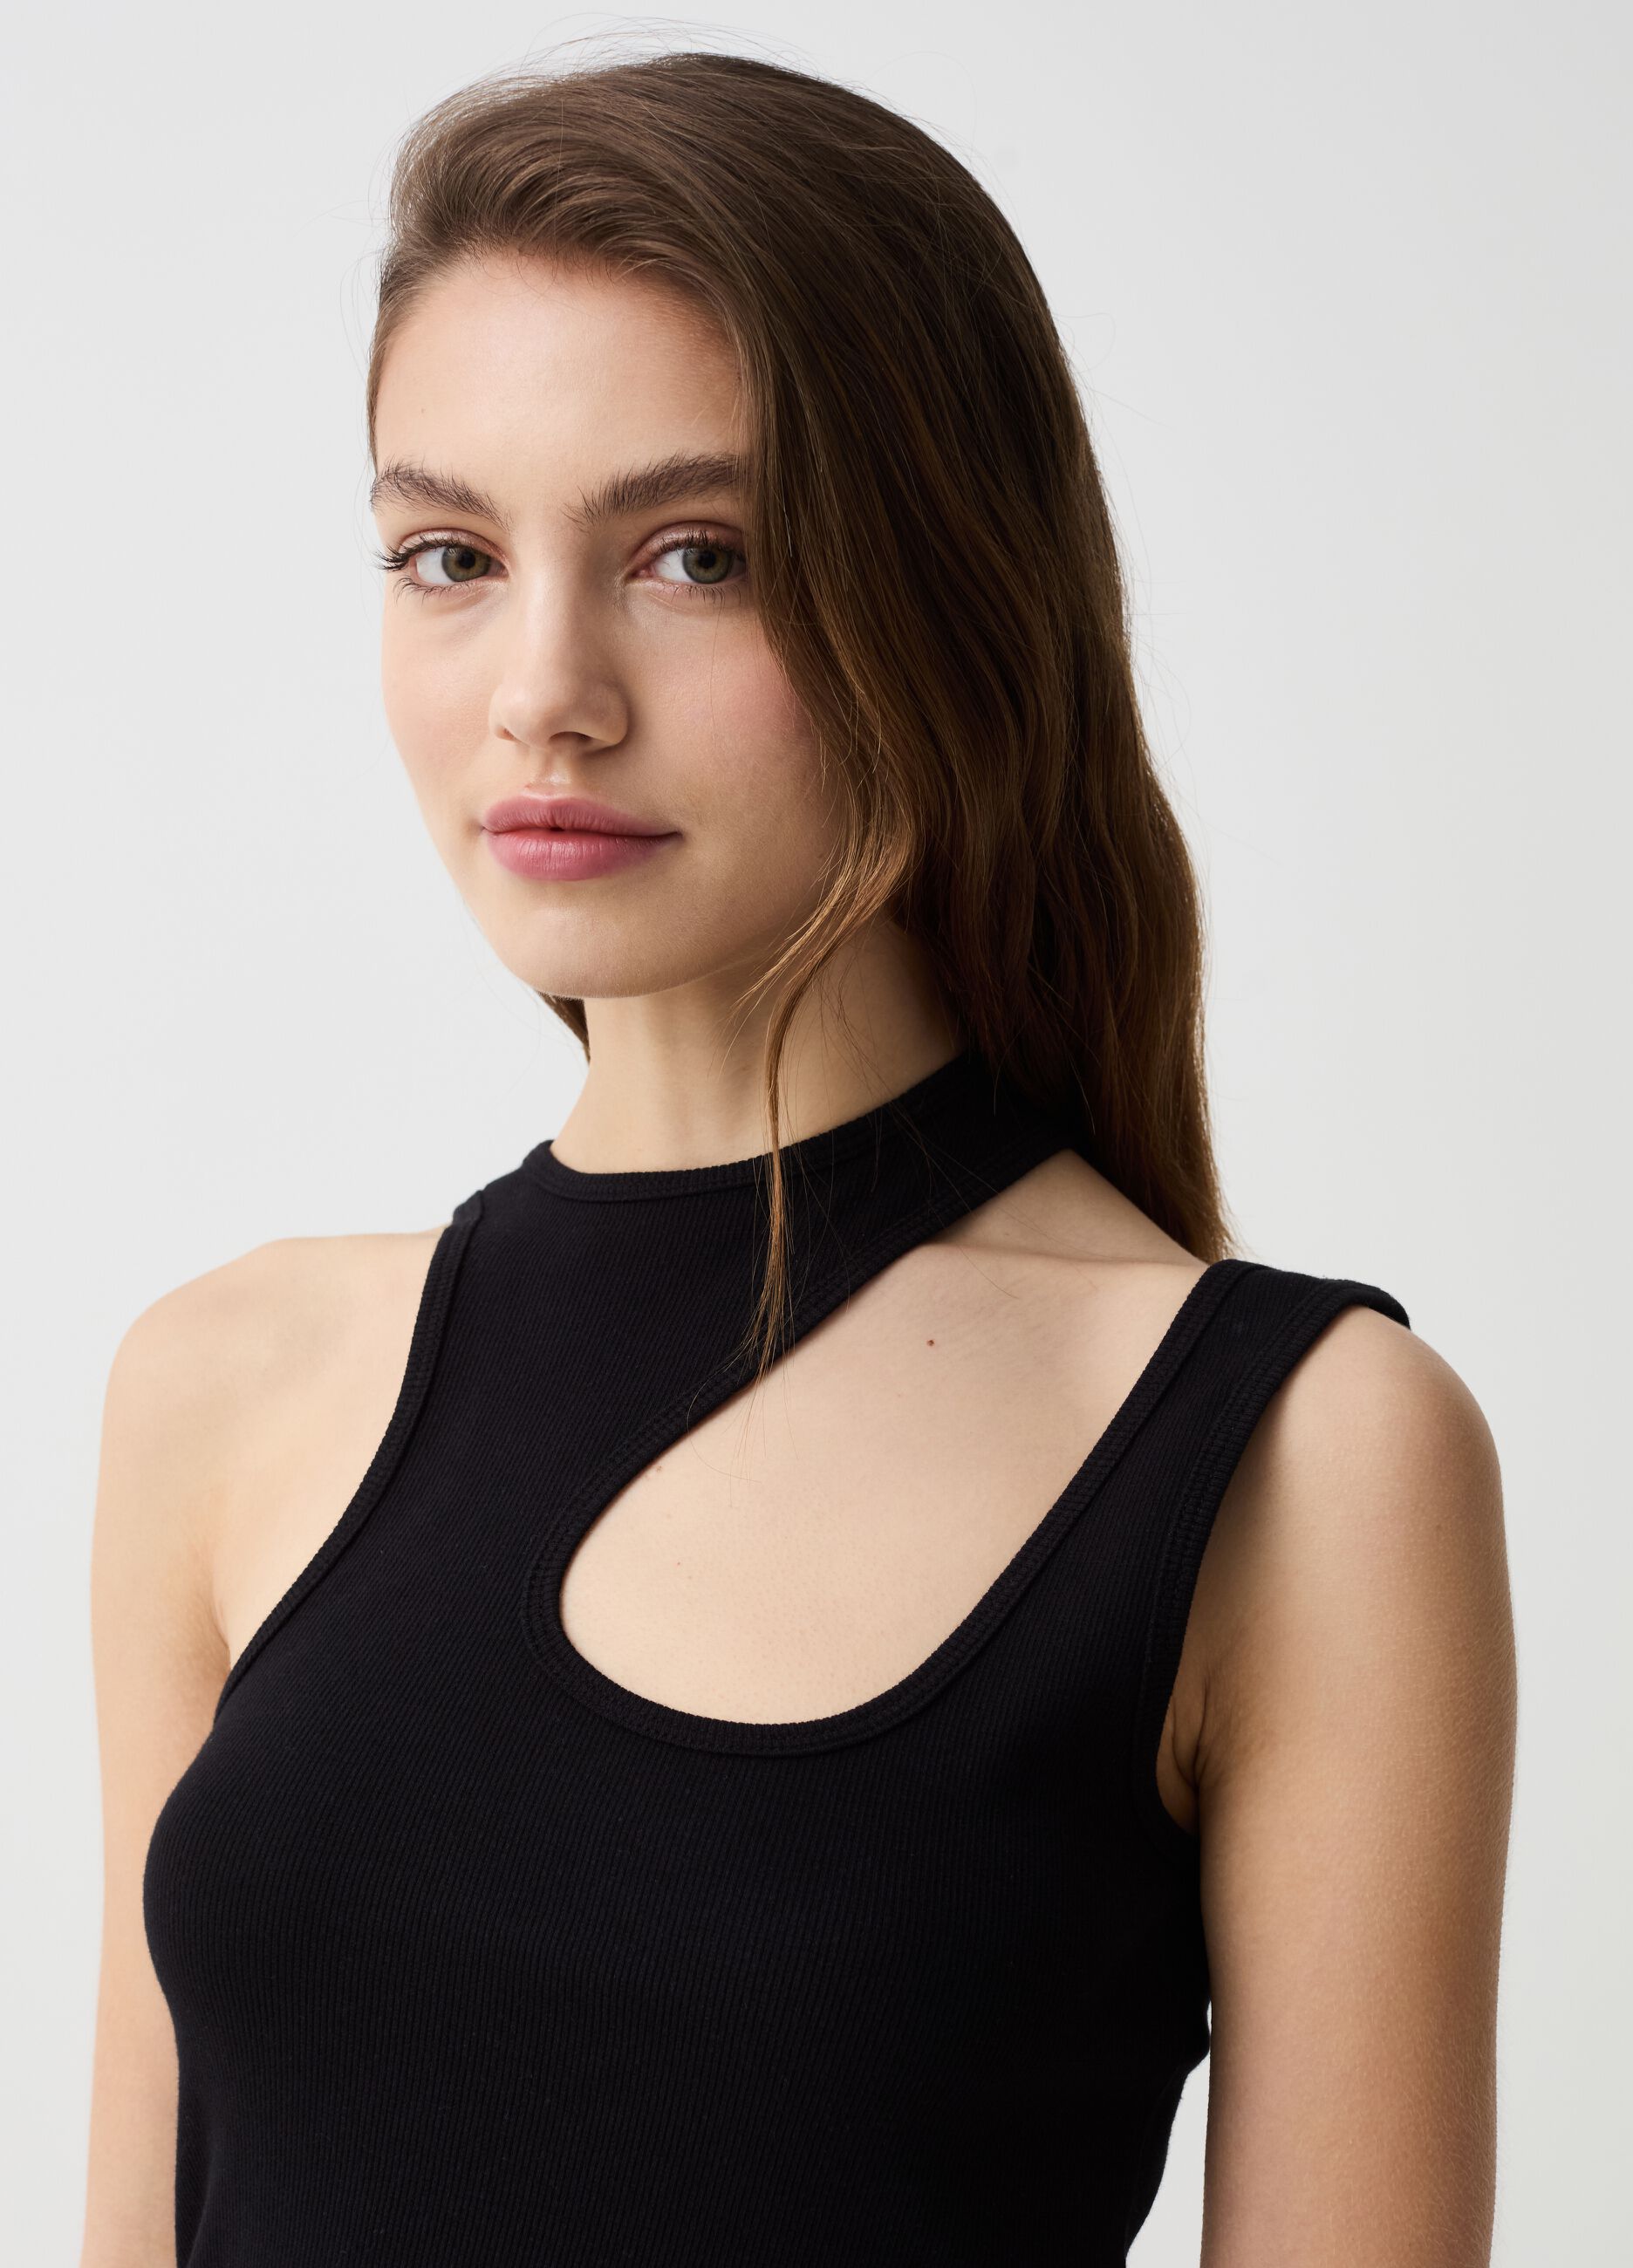 Single-shoulder top with cut-out detail